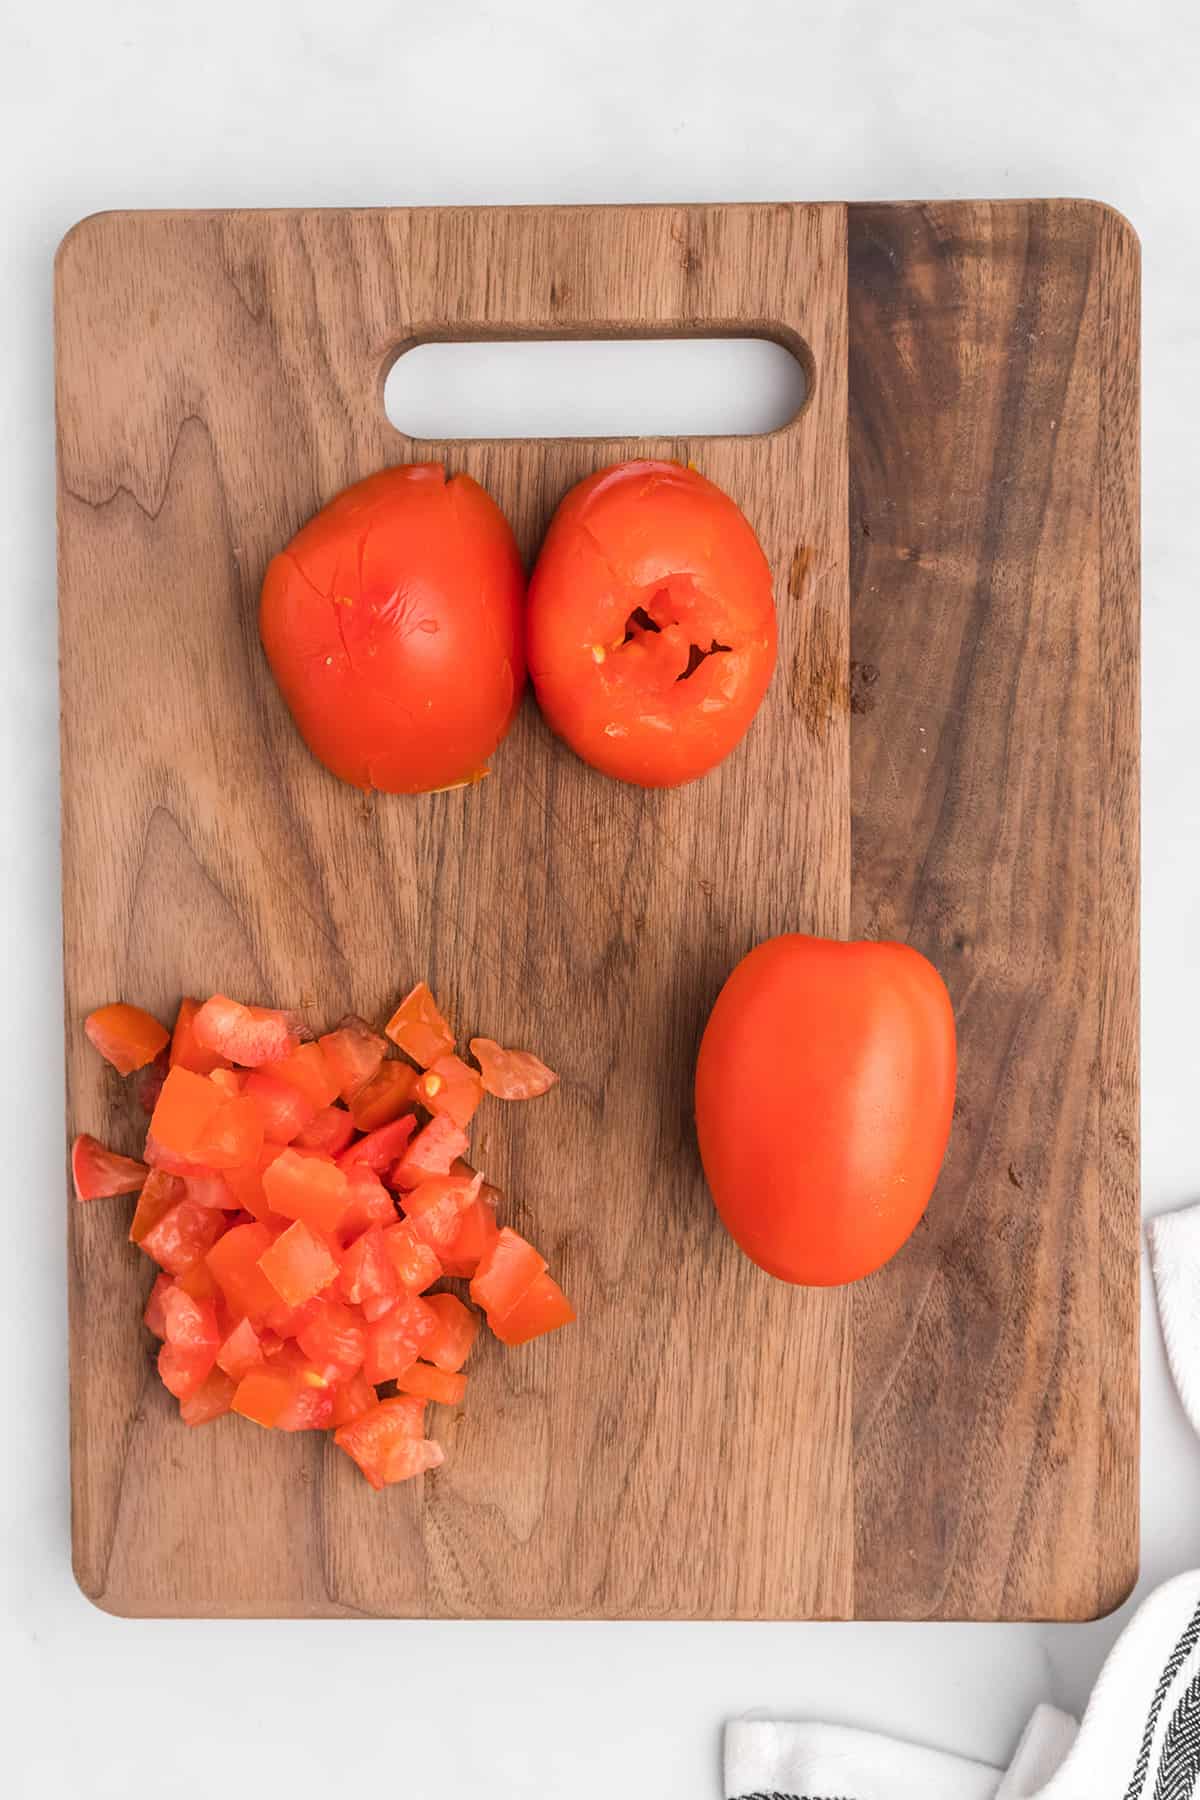 Tomatoes being prepared for the salad on a wooden board.